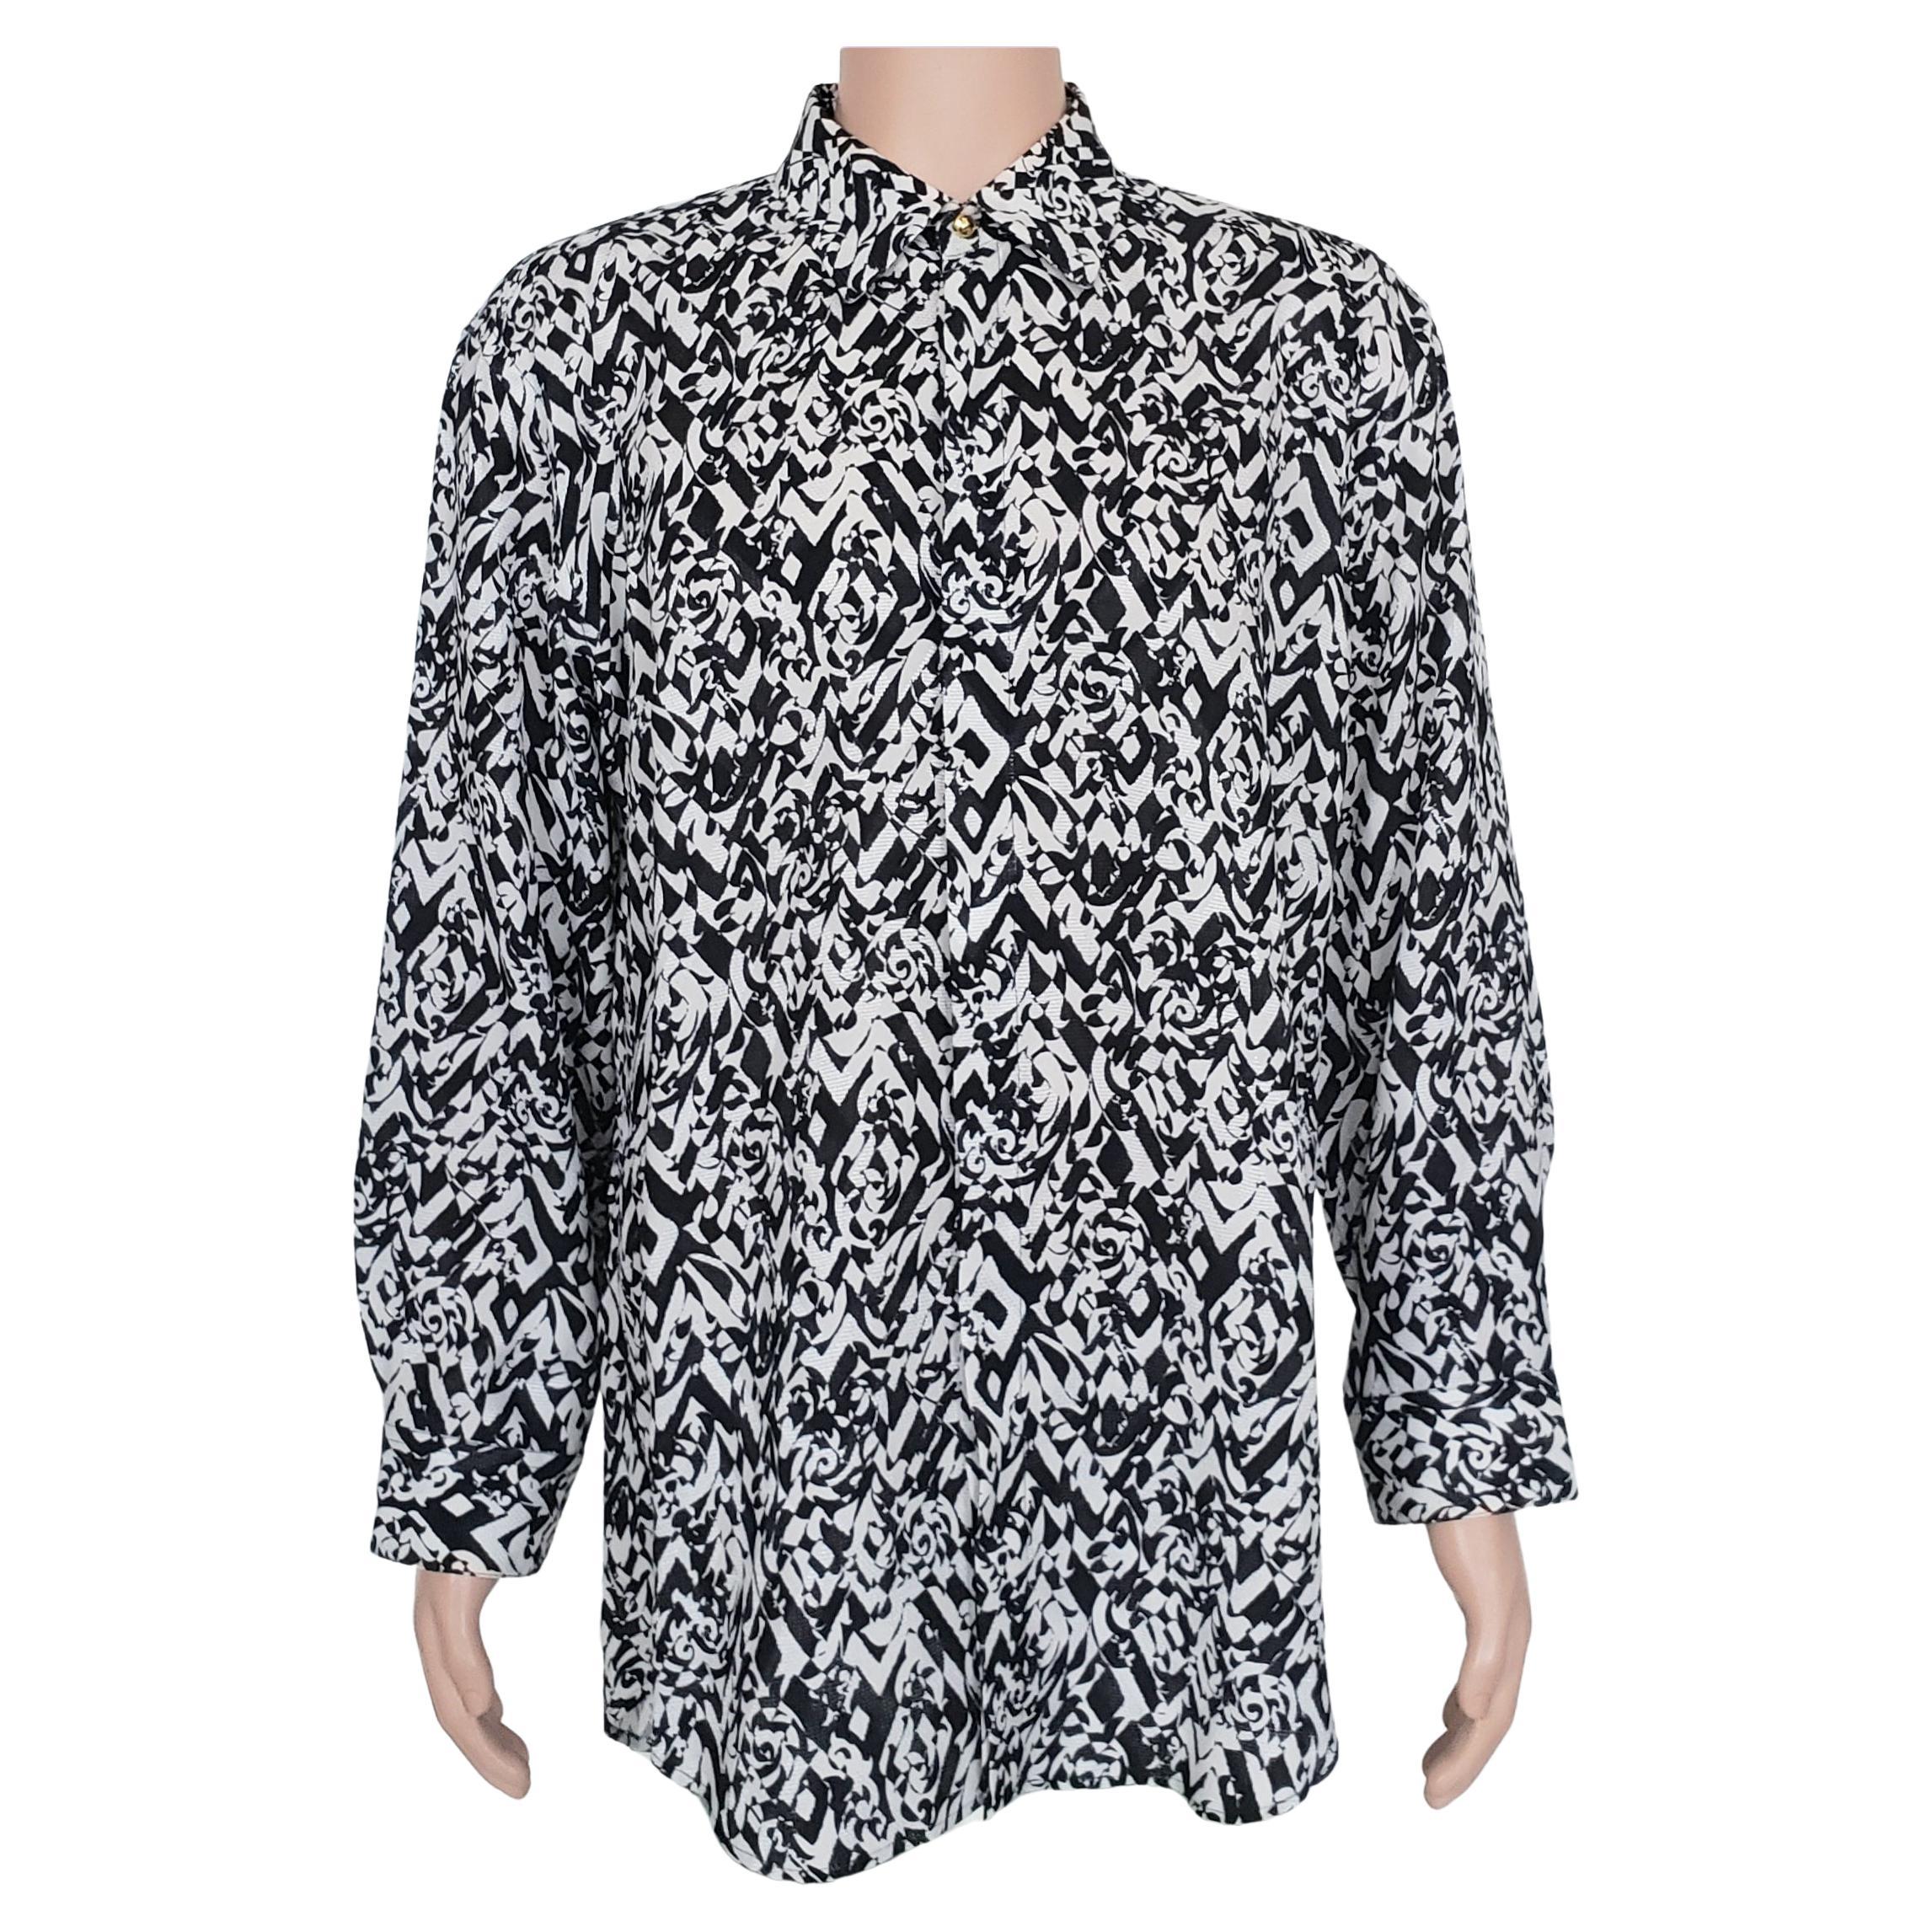 NEW VERSACE BLACK and WHITE PRINTED SHIRT IT 52 - US XL